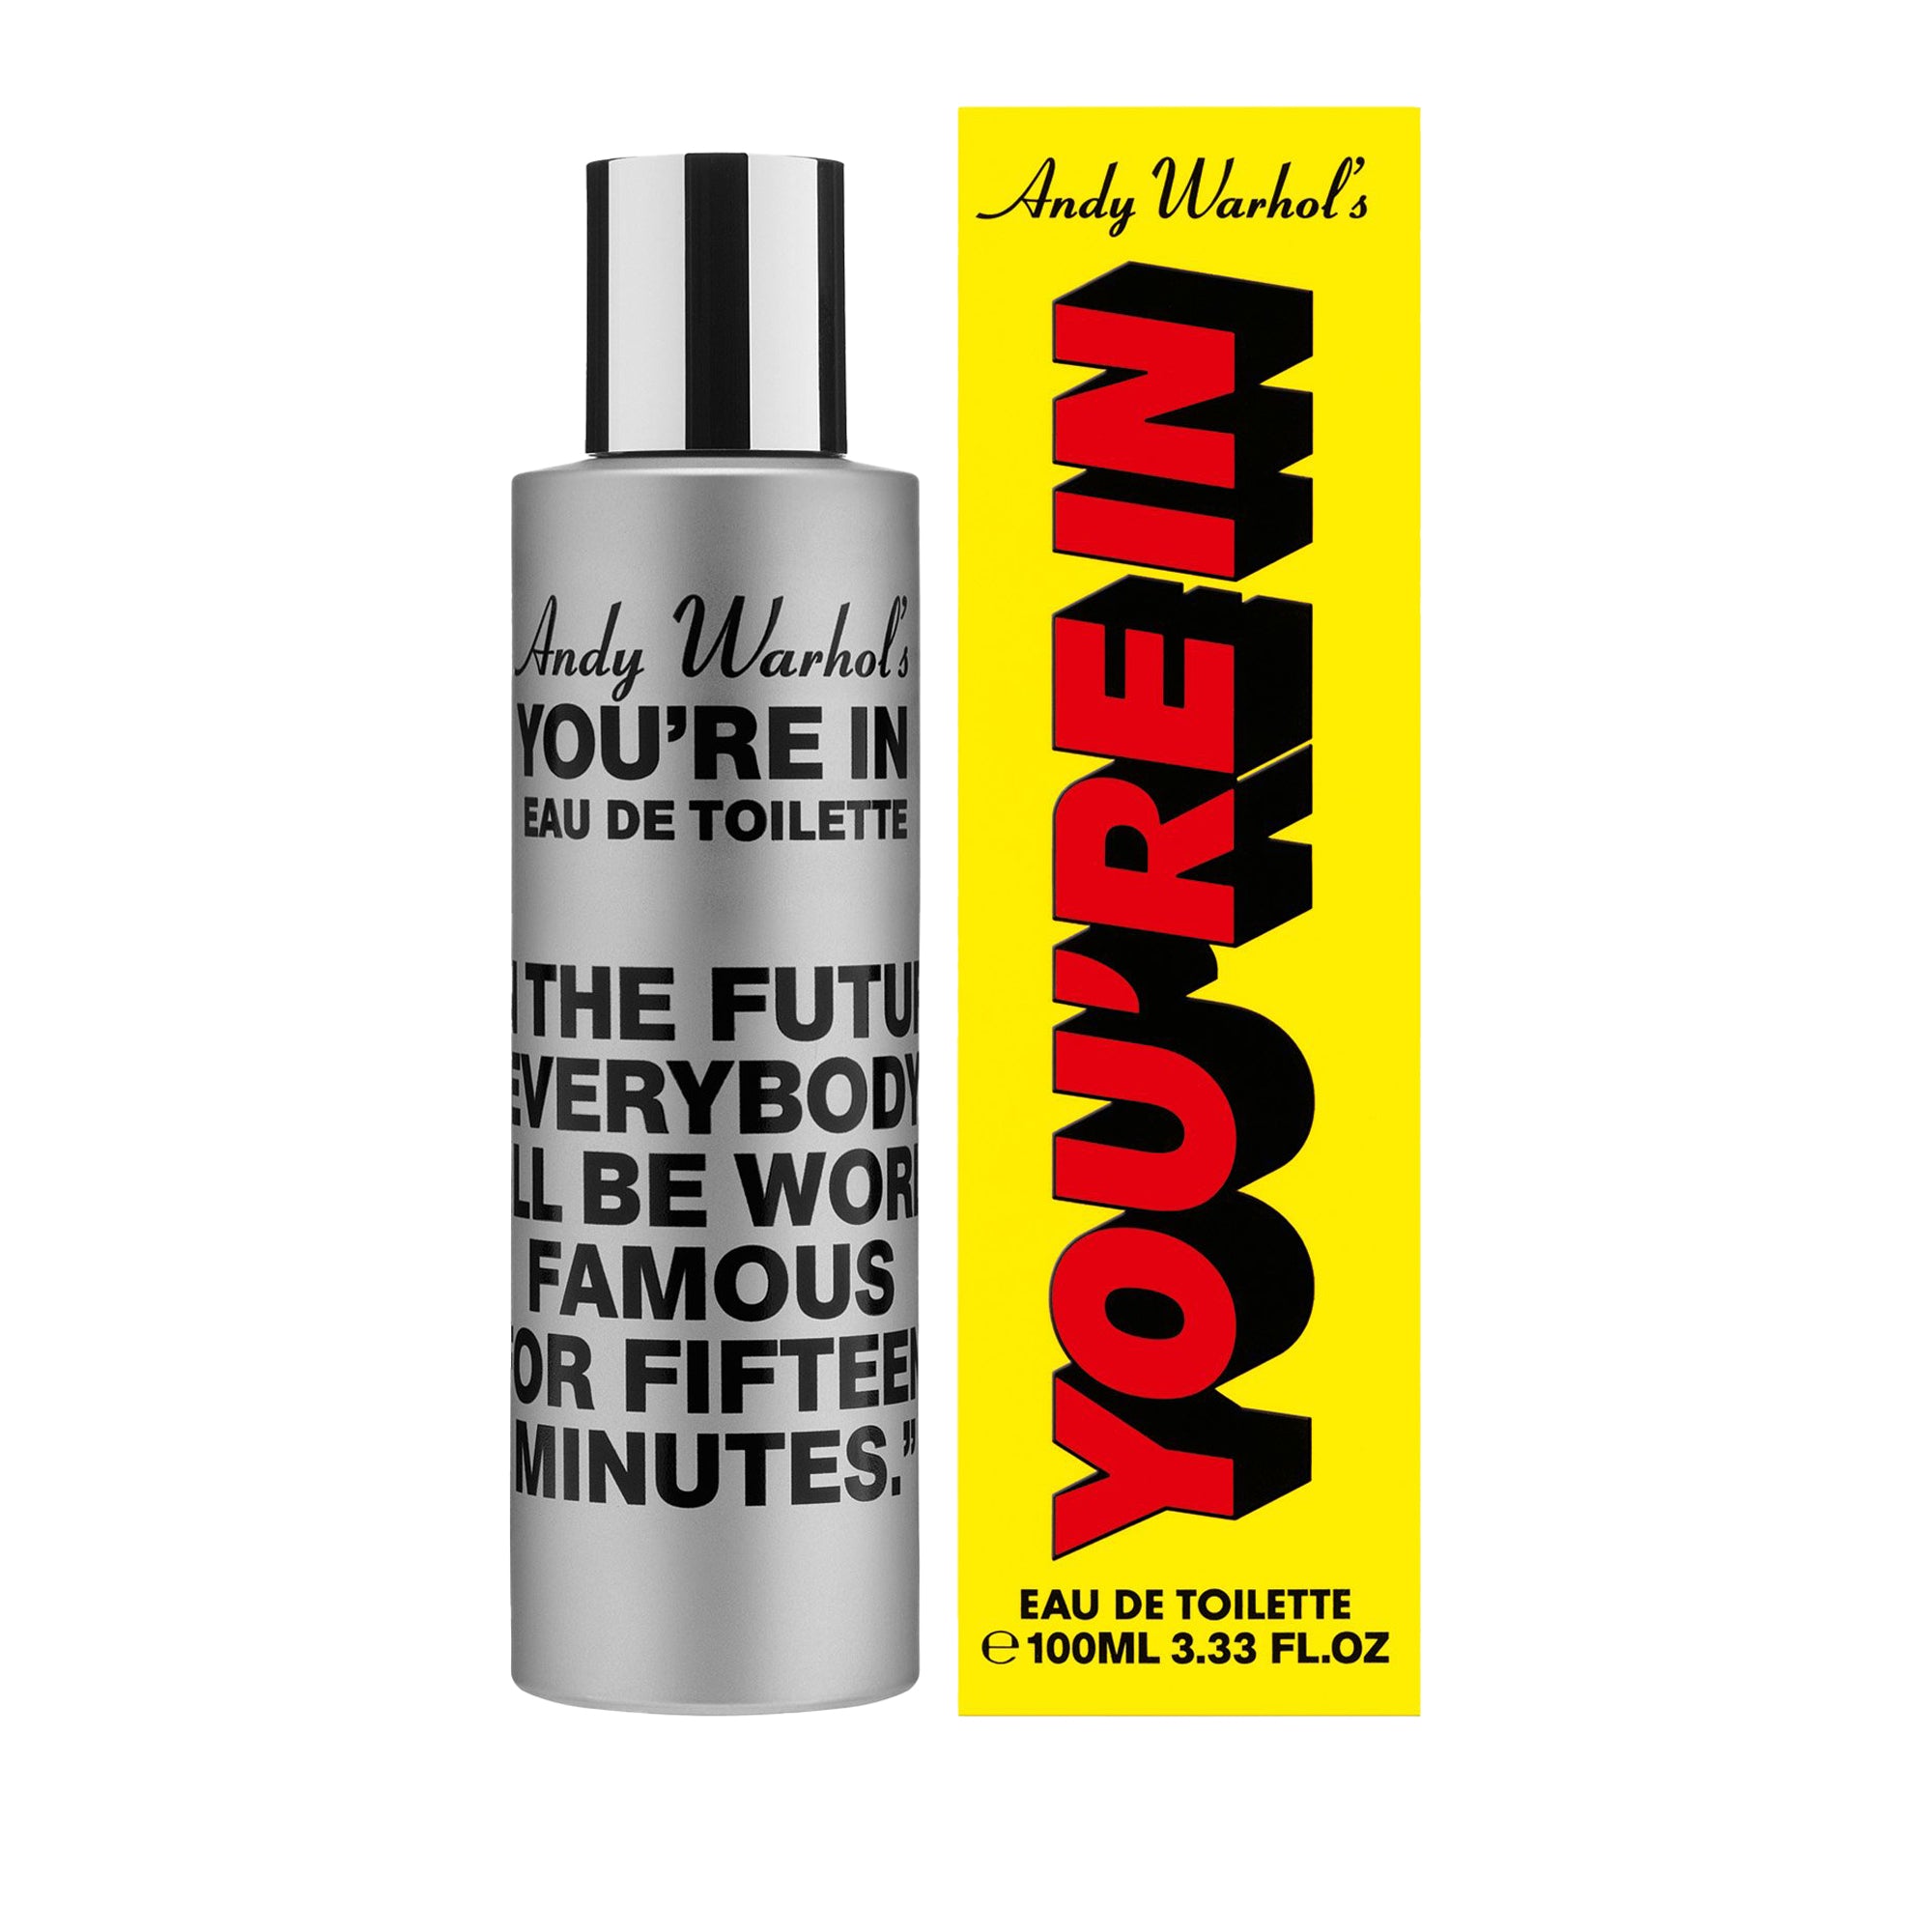 CDG PARFUM - "Andy Warhol's You're In" 100ml  - (WORLD FAMOUS) view 2